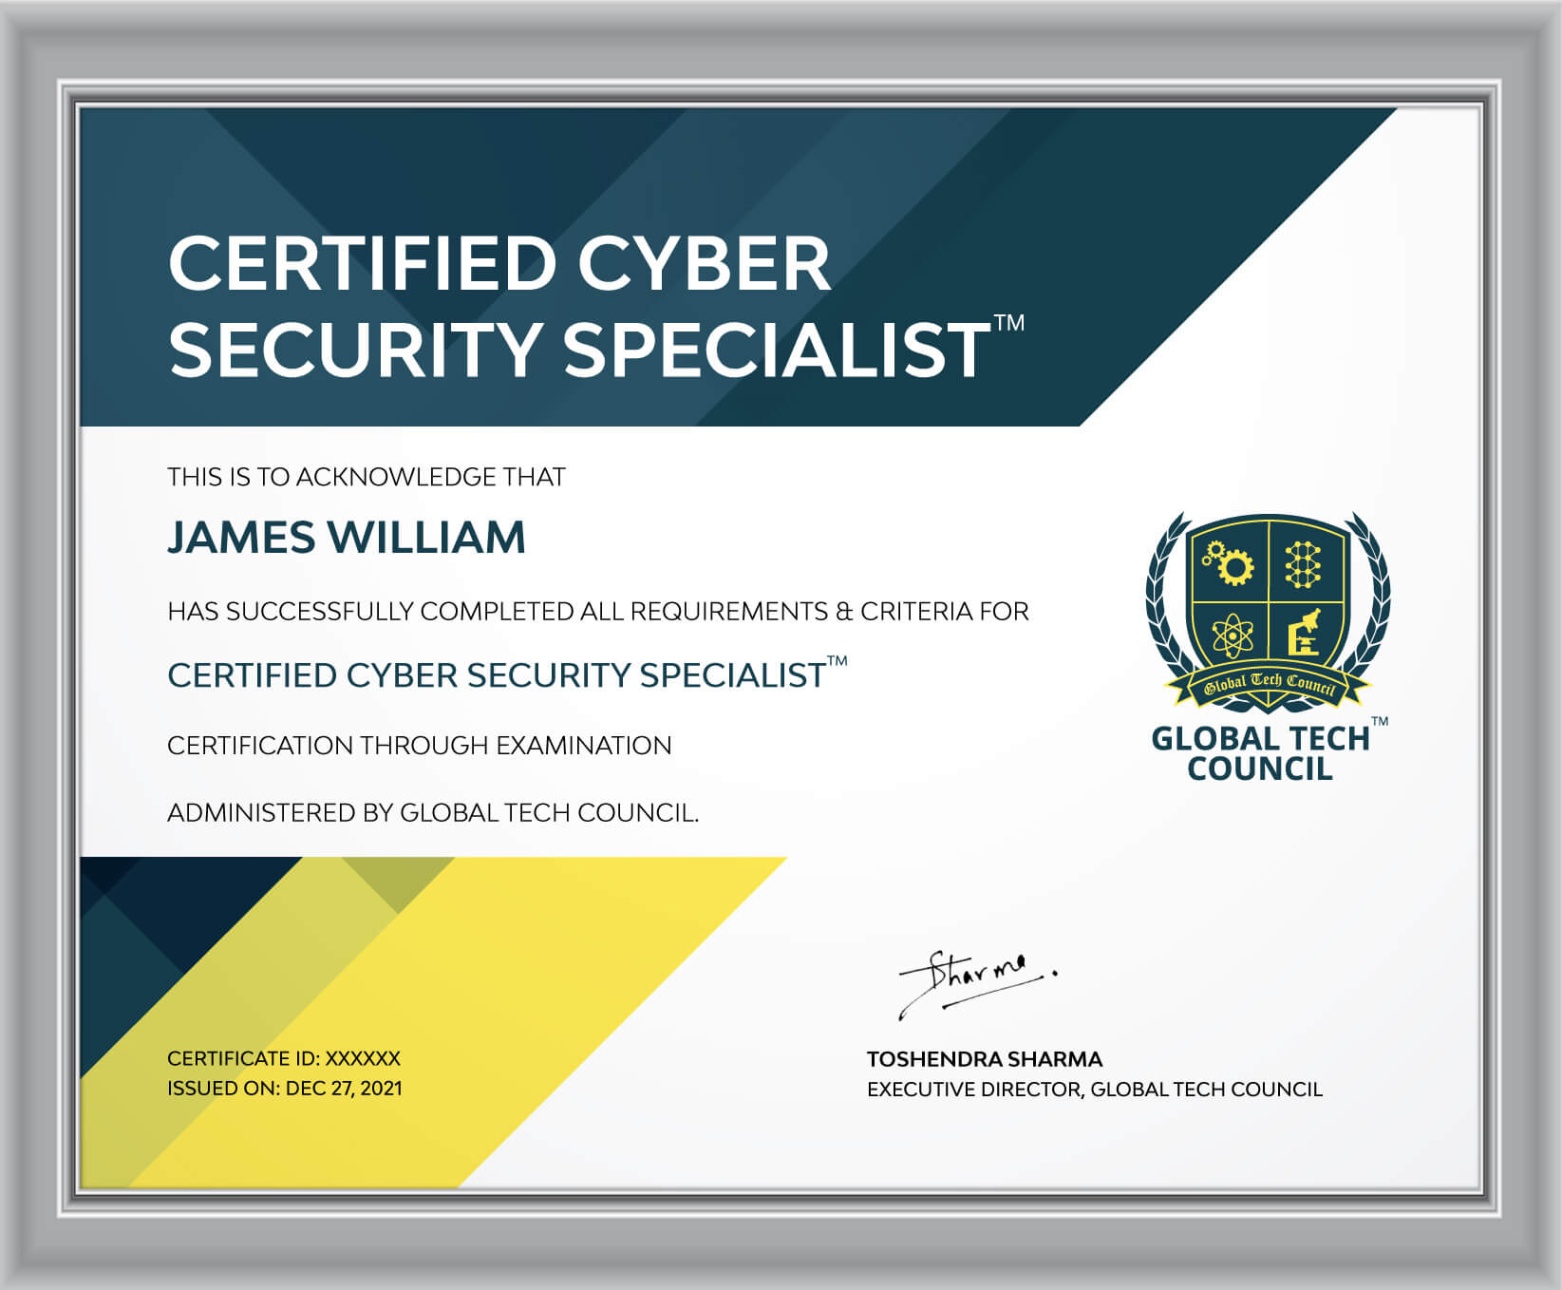 Get Certified In Cybersecurity Online And Level Up Your Tech Skills Today!